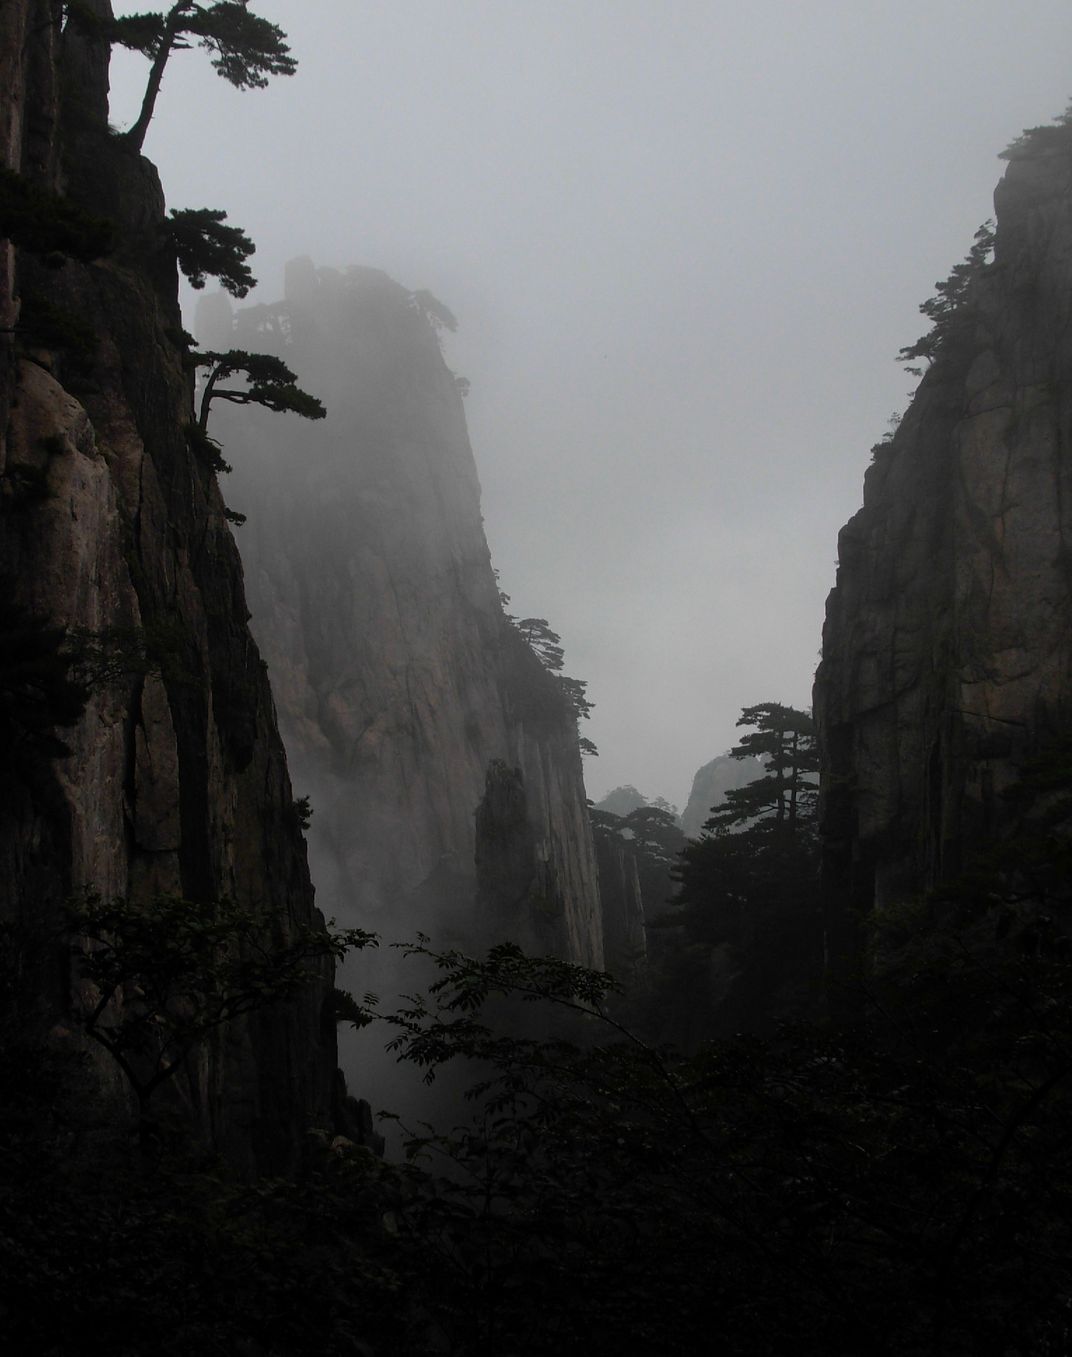 Mists part on Huang Shan, the Yellow Mountain, in Anhui Province, China ...